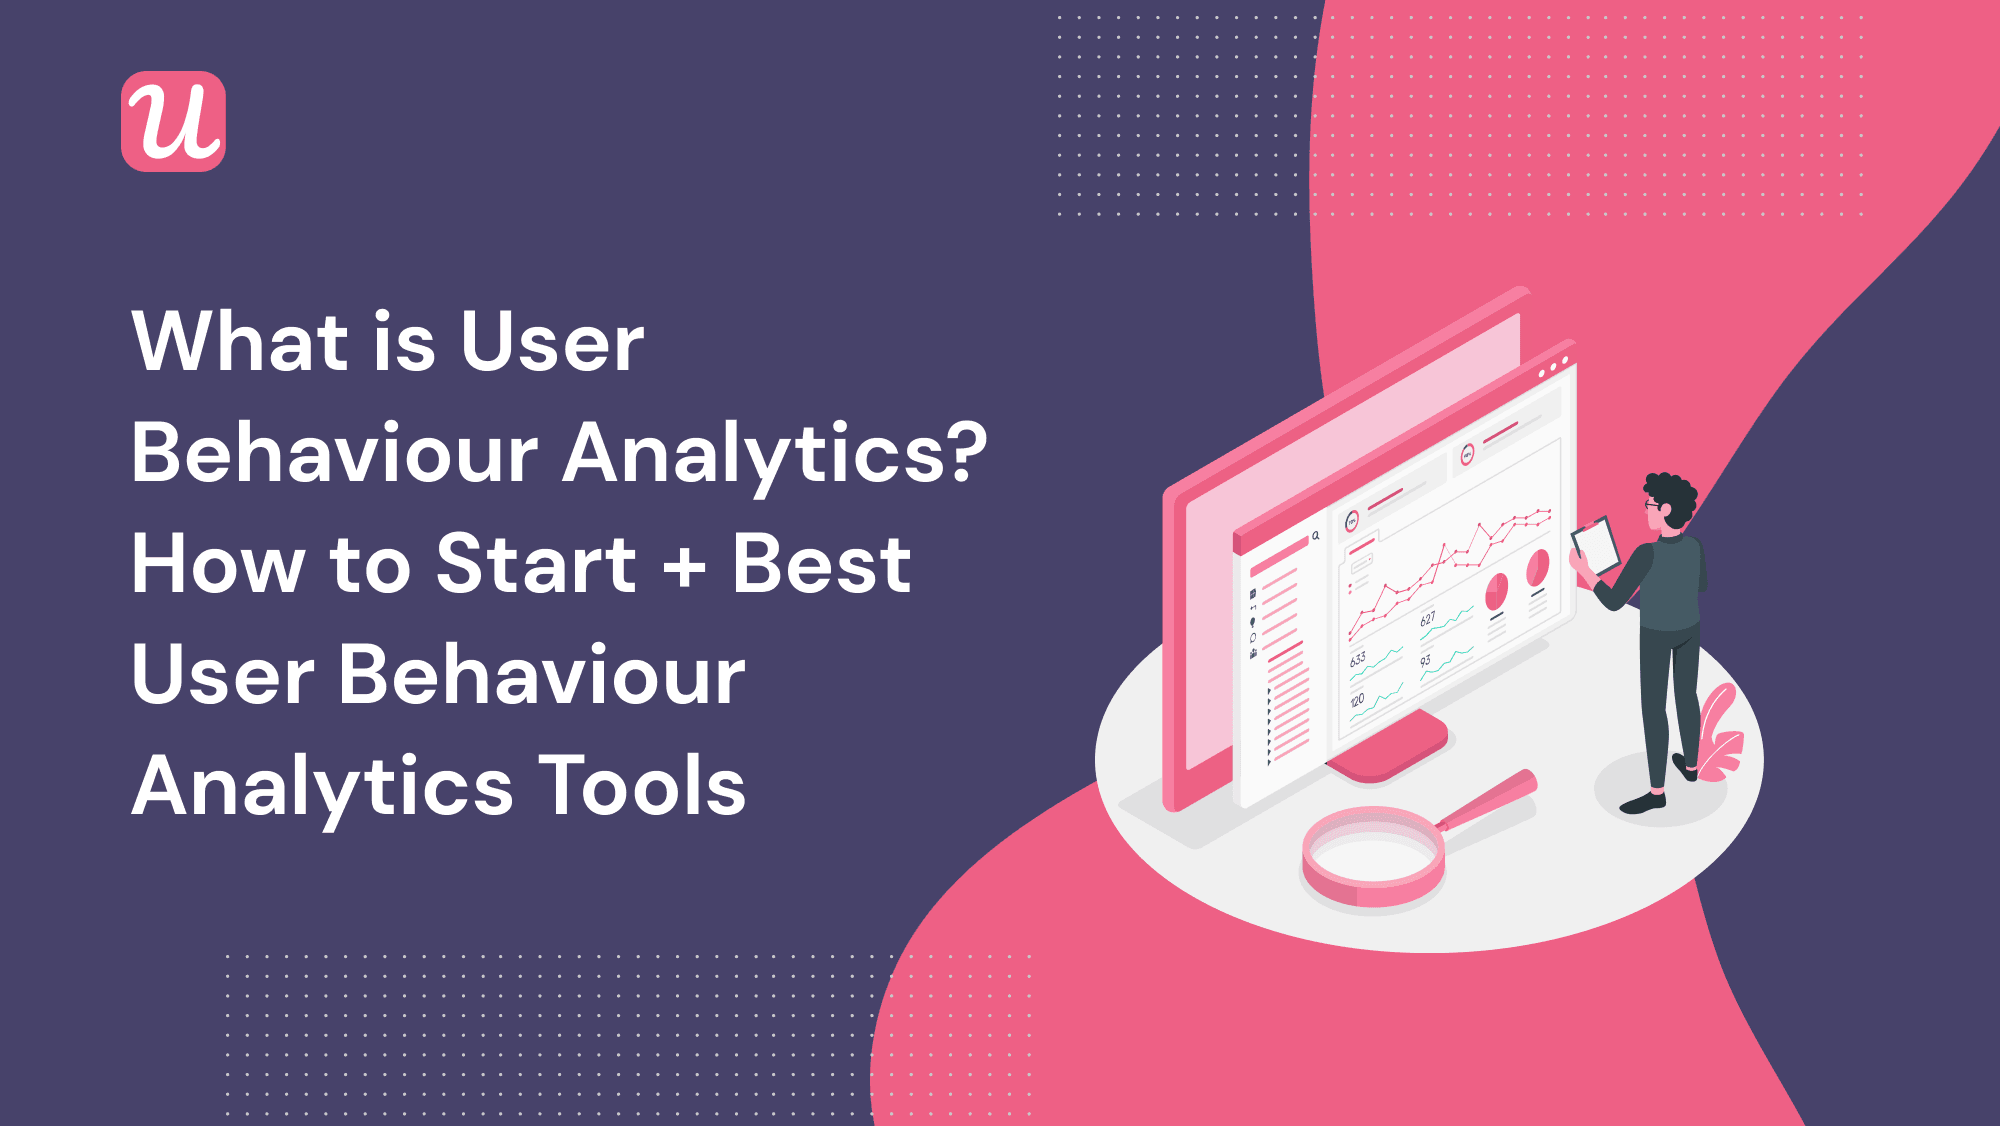 How To Get Started With User Behaviour Analytics and The Best Tools